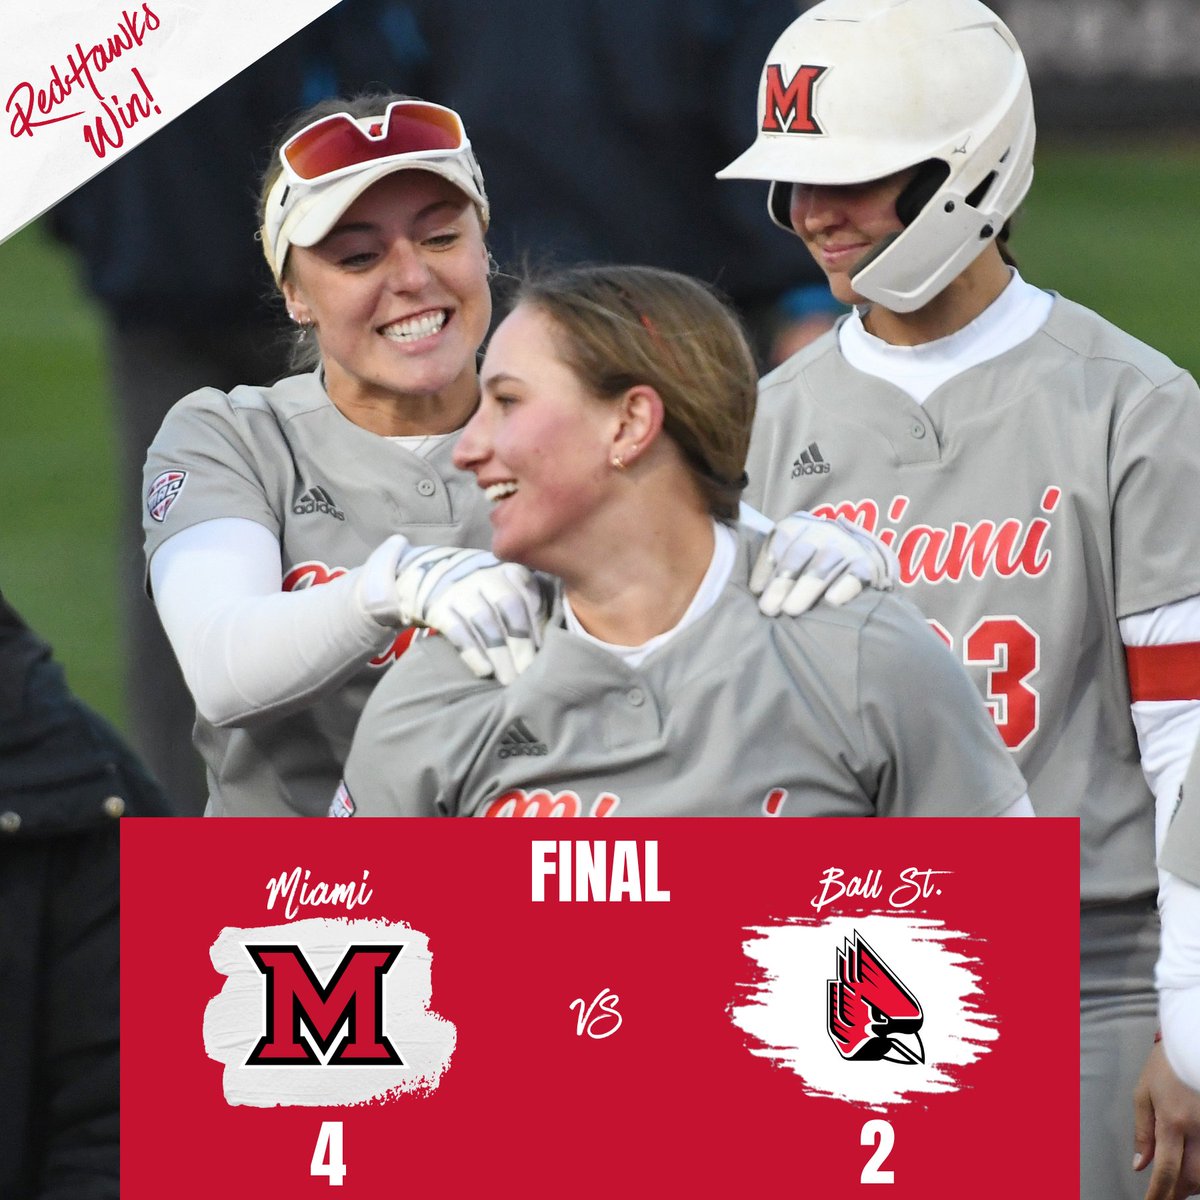 The RedHawks get the sweep on the Cardinals! 🧹🧹 🔴 Allie Cummins hit three home runs on the day 🔴 The RedHawks remain undefeated in MAC play 🔴 The RedHawks extend their win streak to 21 games in a row -- a MAC record #RiseUpRedHawks